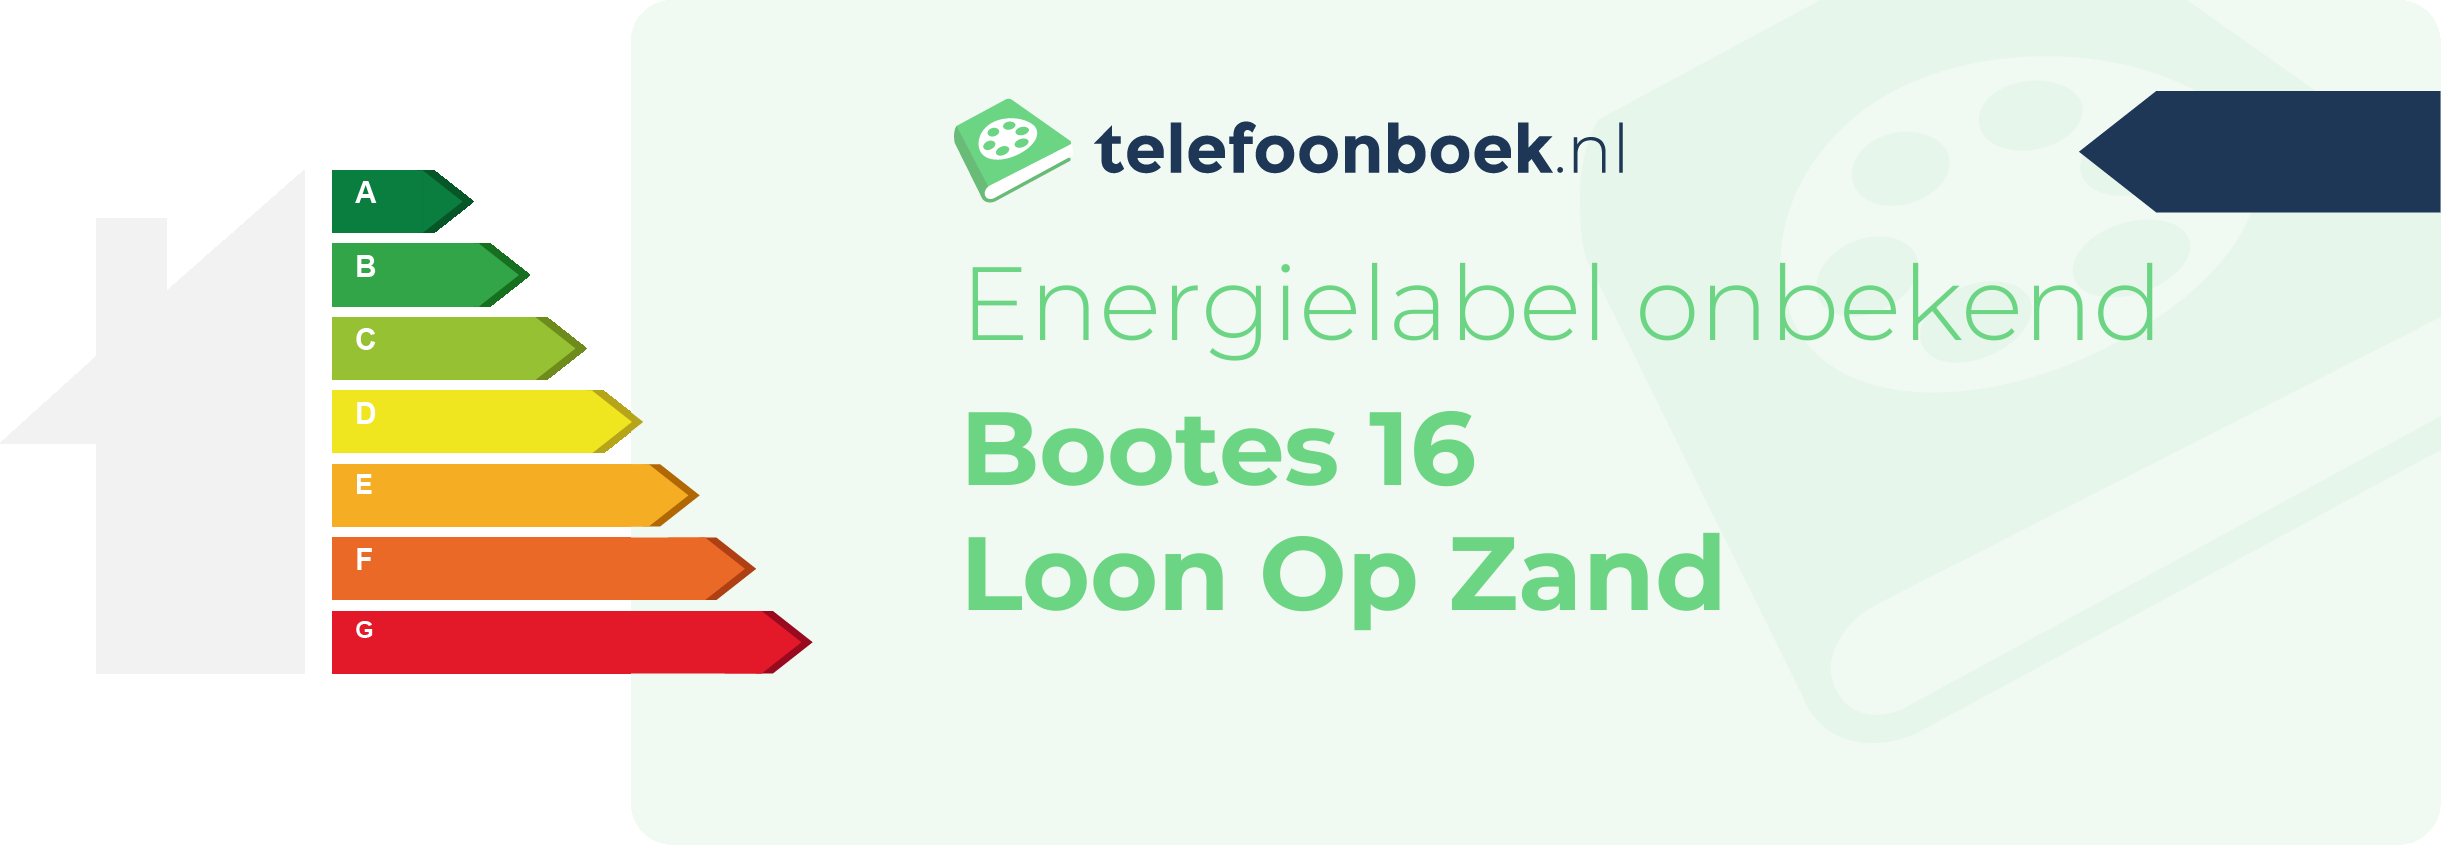 Energielabel Bootes 16 Loon Op Zand